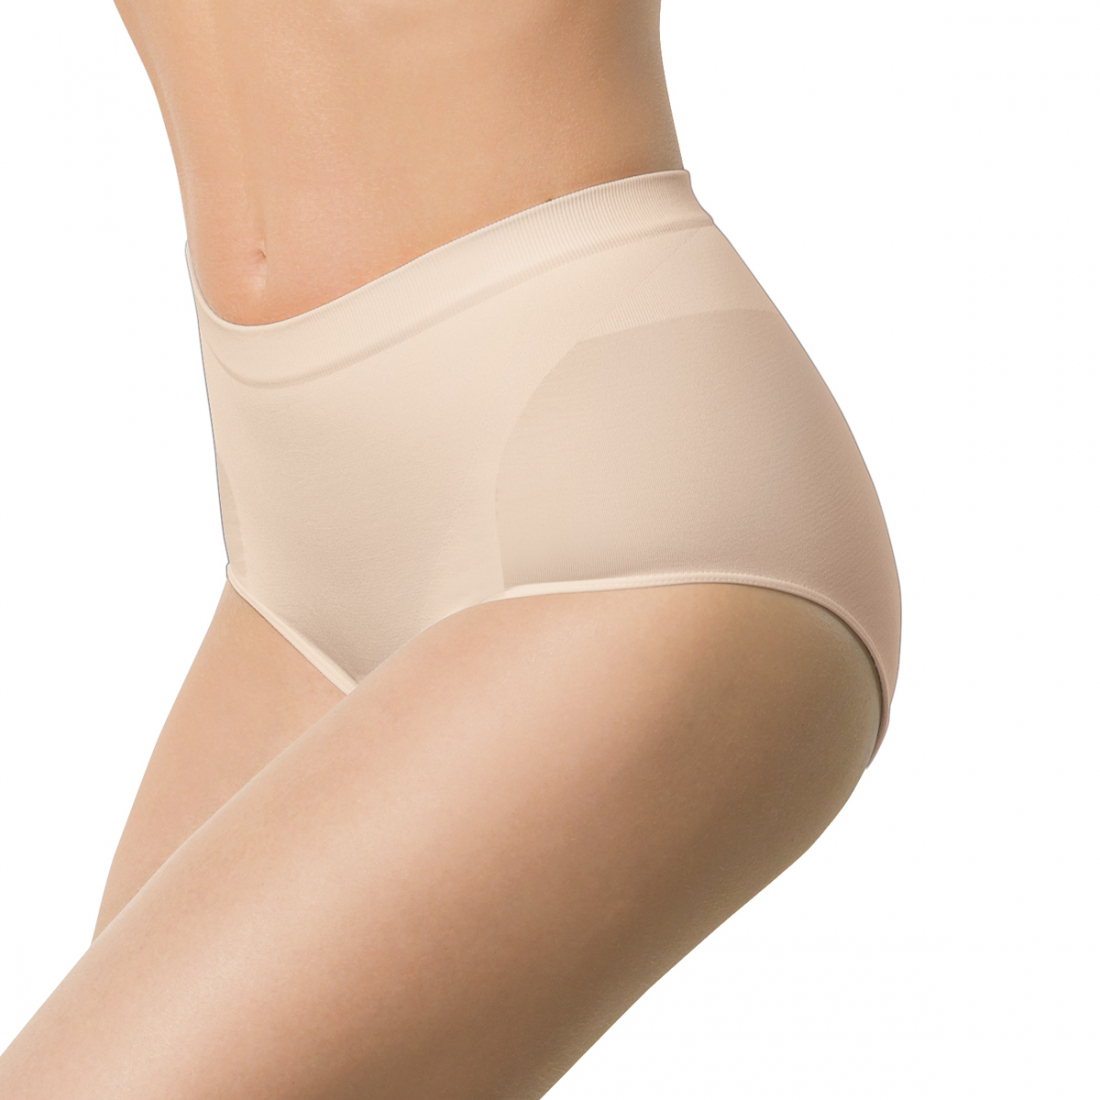 Women's 'Silhouette Extra' Shaping Briefs